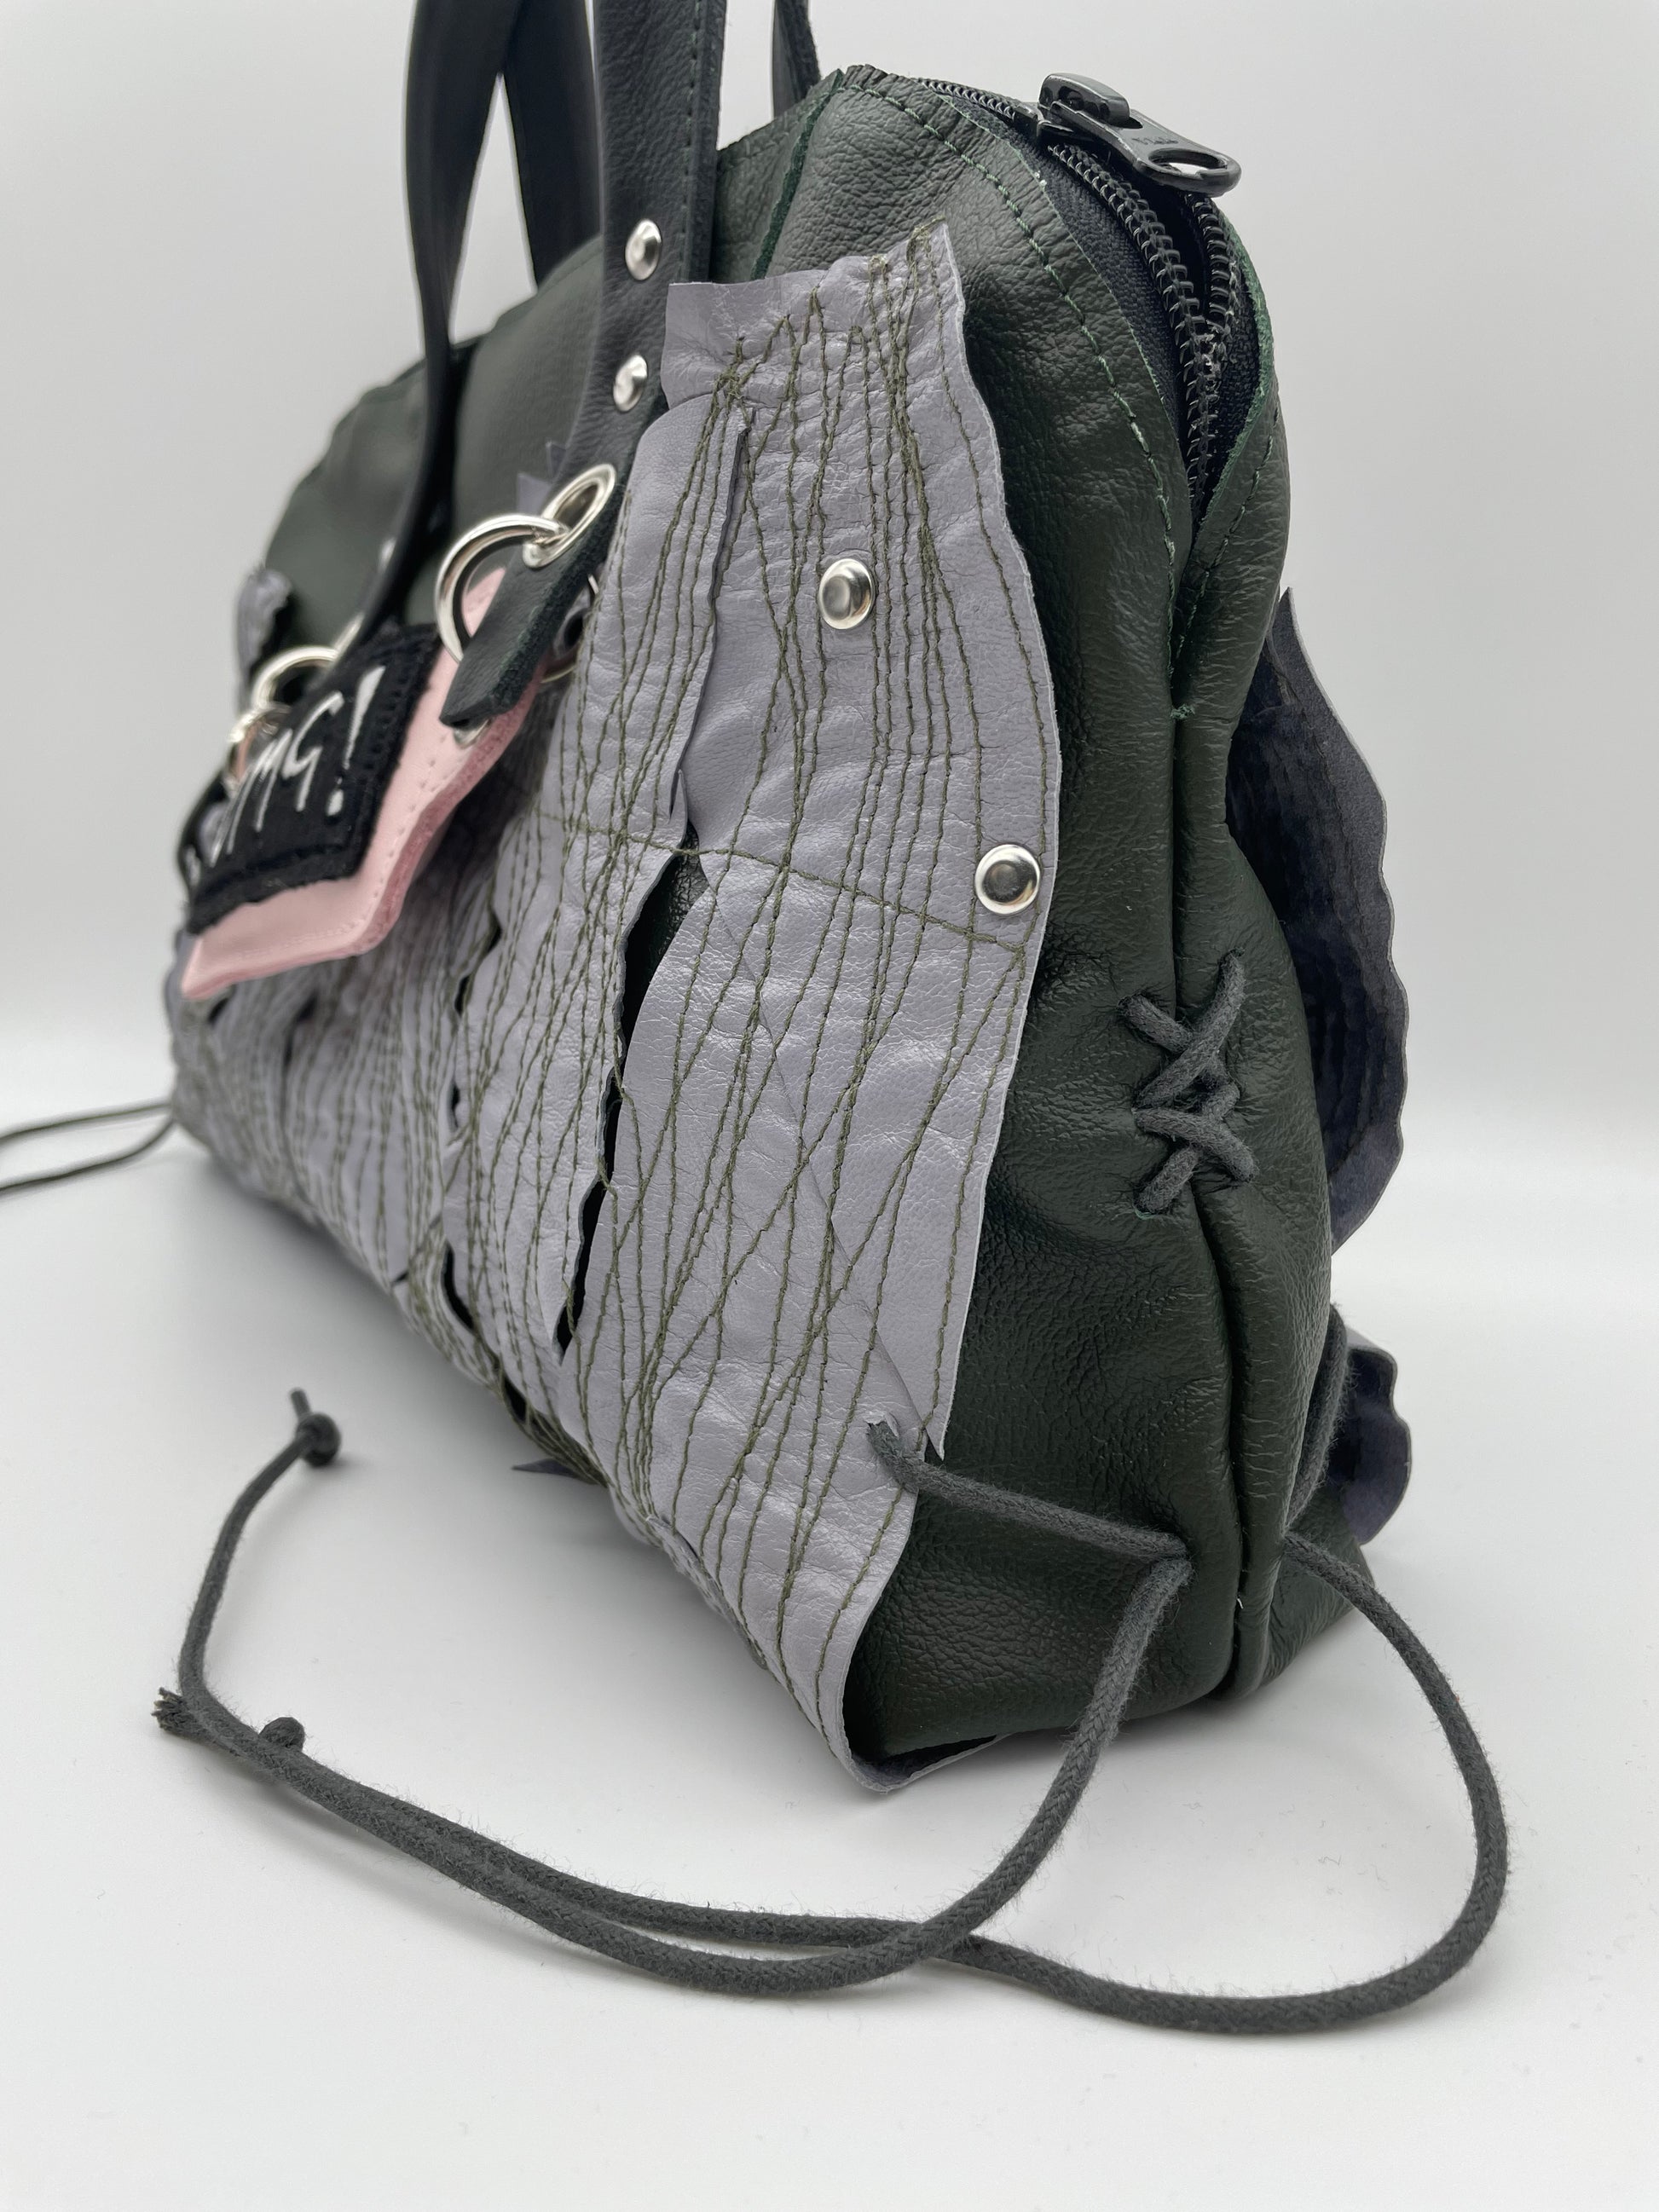 Upcycling bag REEBEL out of dark green OMG upcycled leather grey patchwork braided